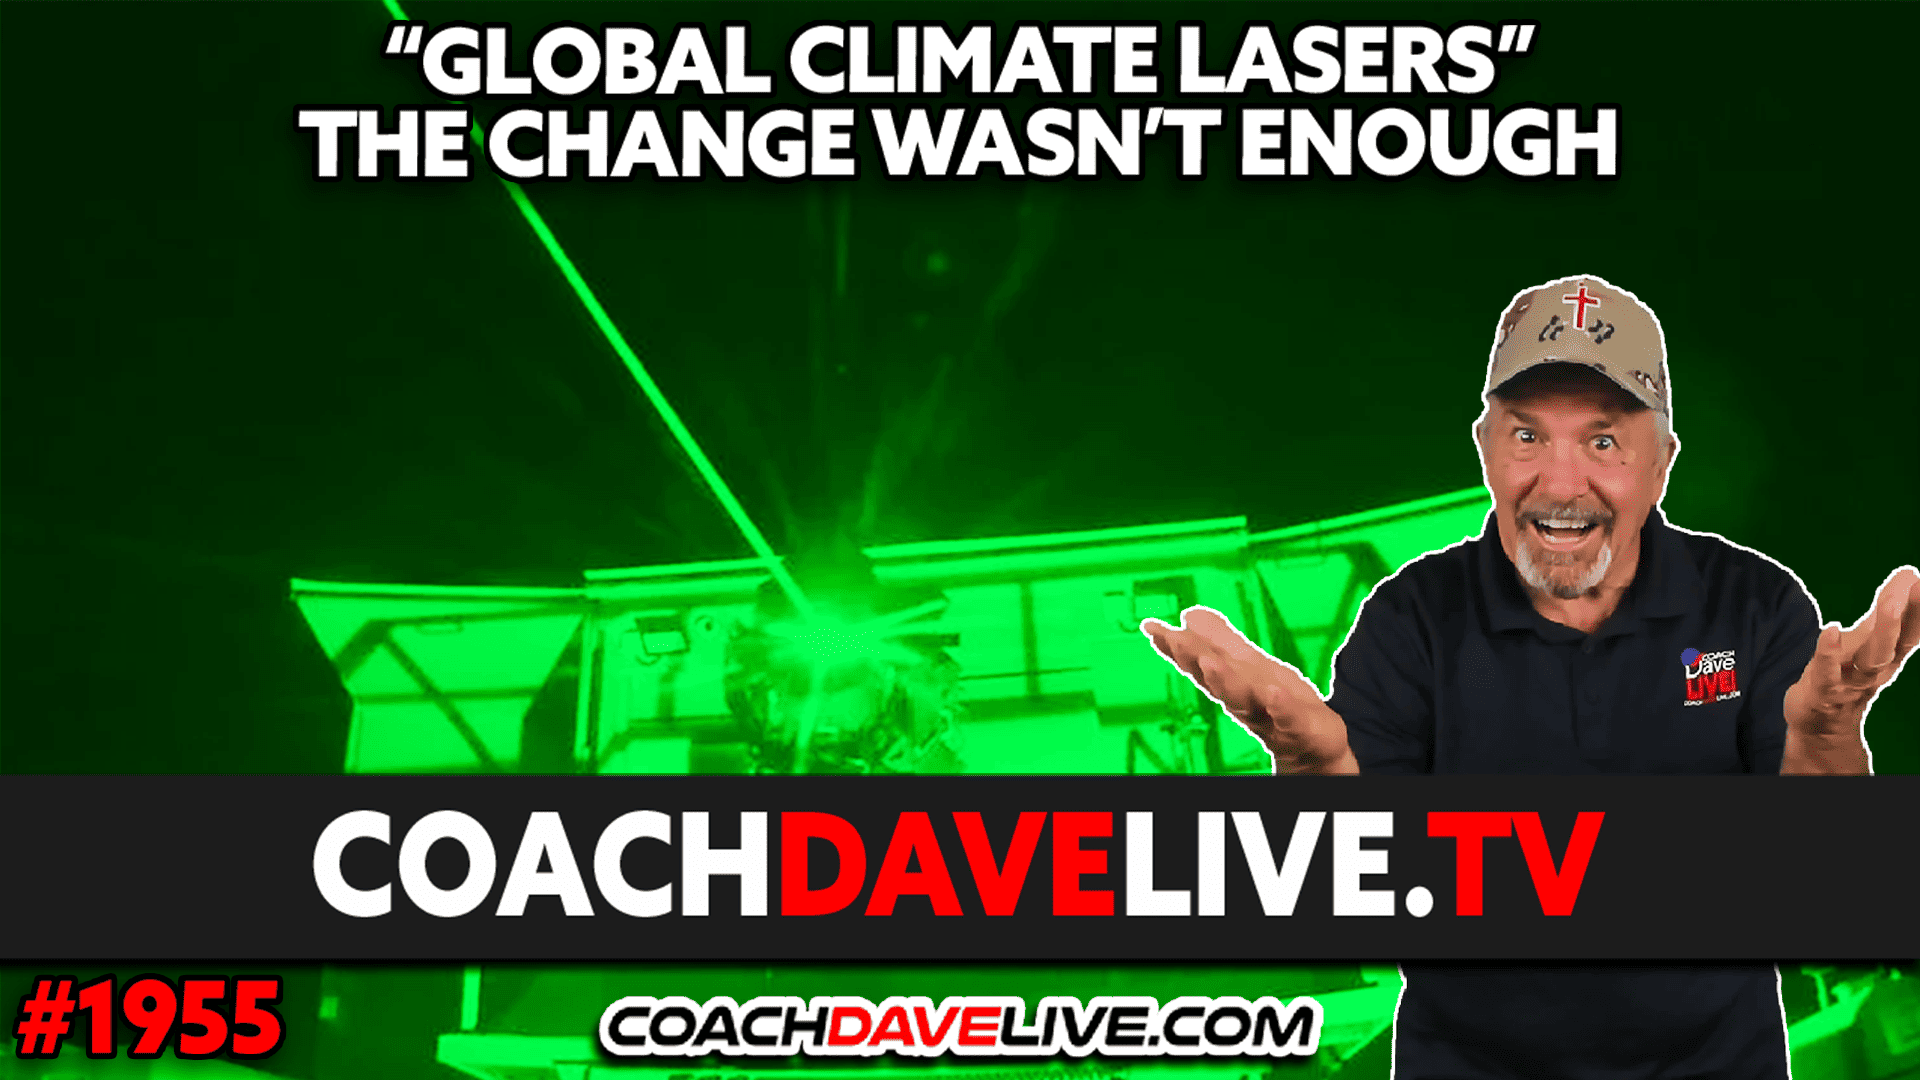 “GLOBAL CLIMATE LASERS” THE CHANGE WASN’T ENOUGH | 8-14-2023